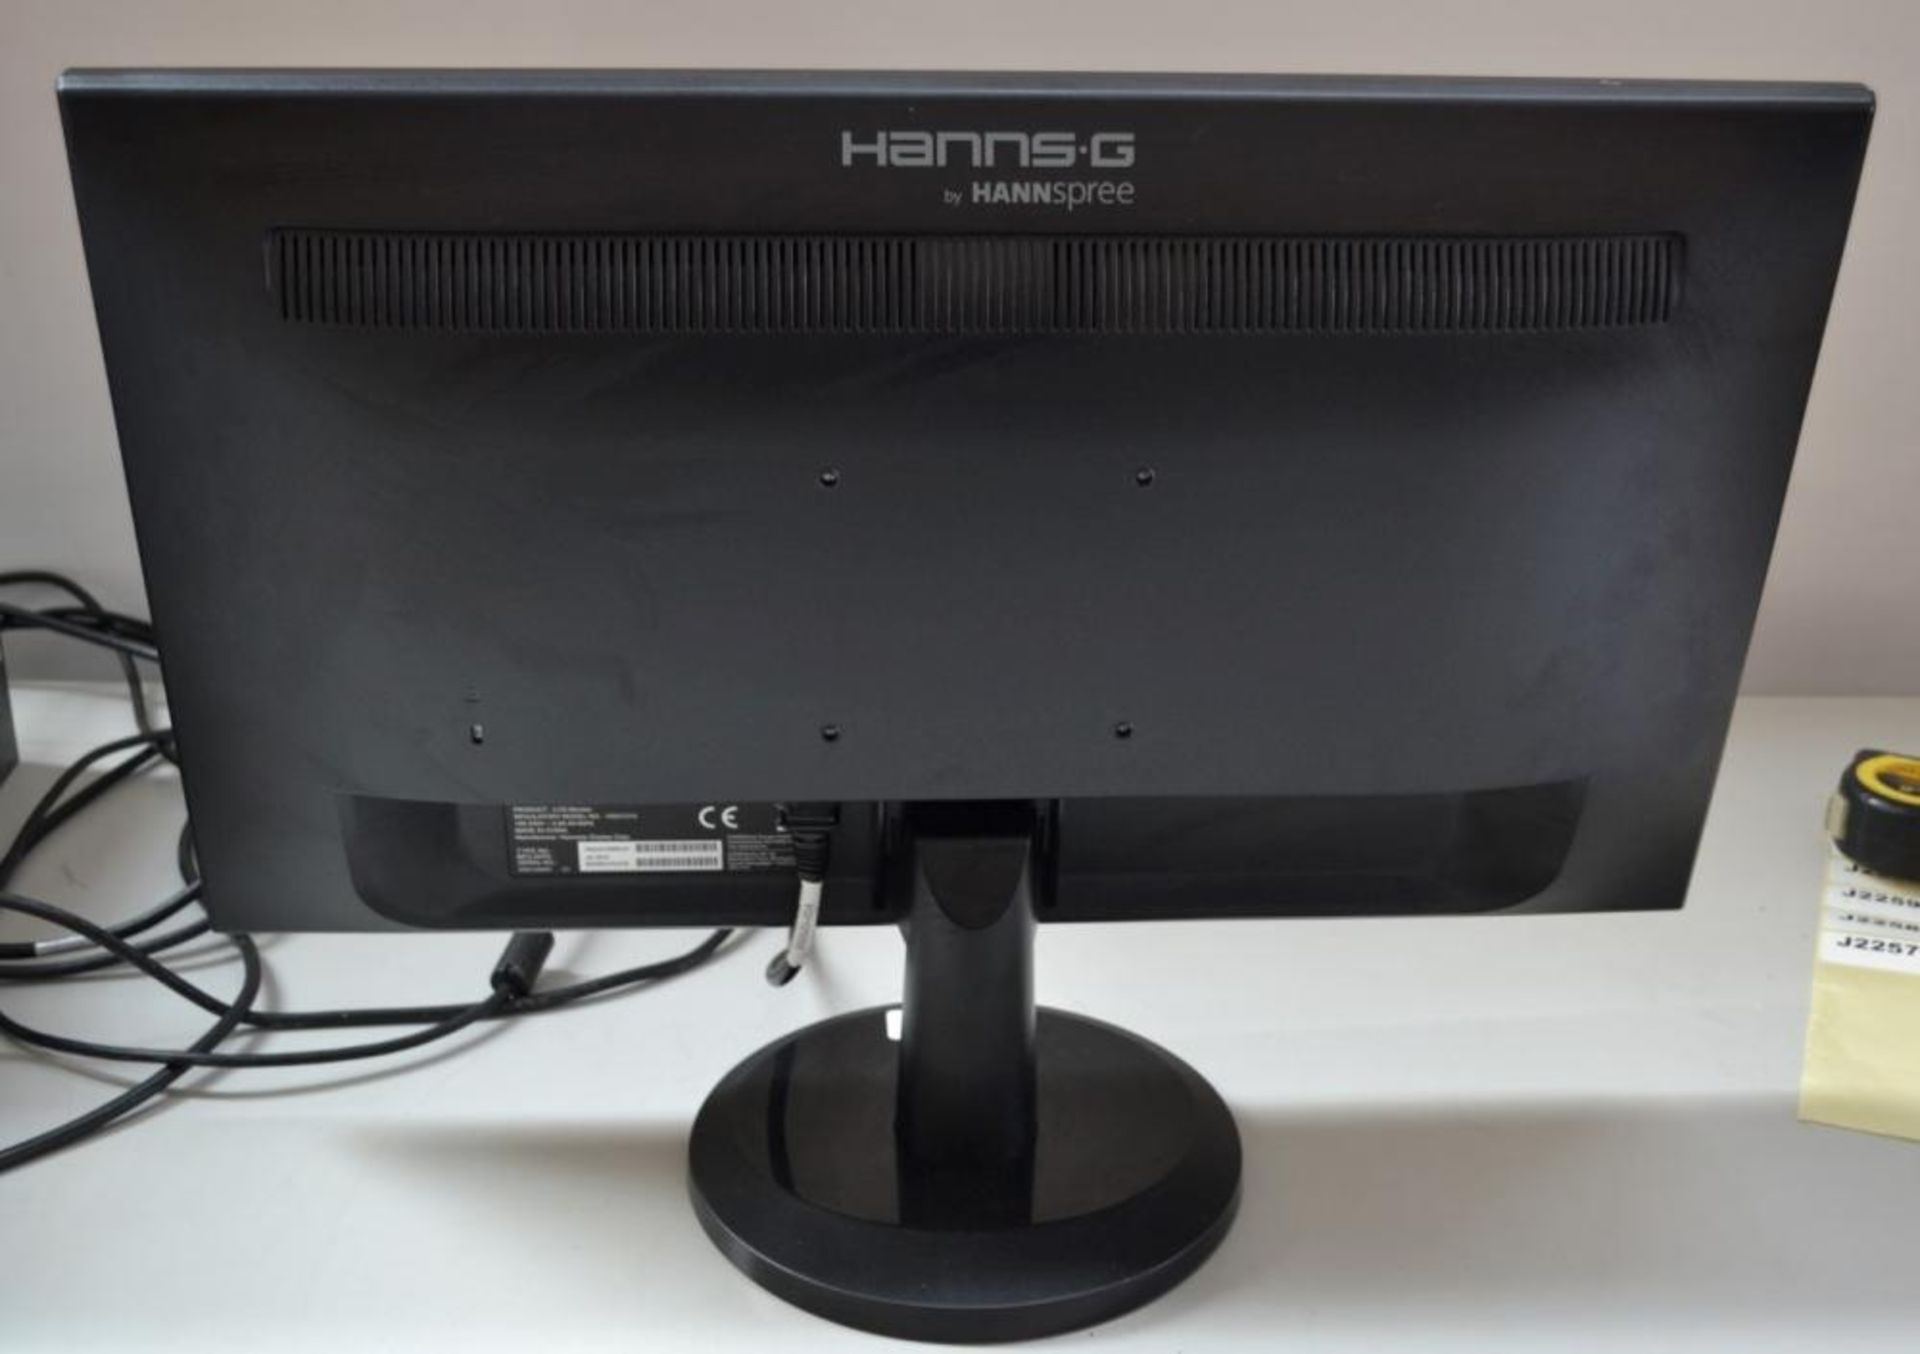 1 x Hanns.G HS243HPB - 23.6IN LED PC Monitor - Ref J2256 - CL394 - Location: Altrincham WA14 - HKPal - Image 2 of 3